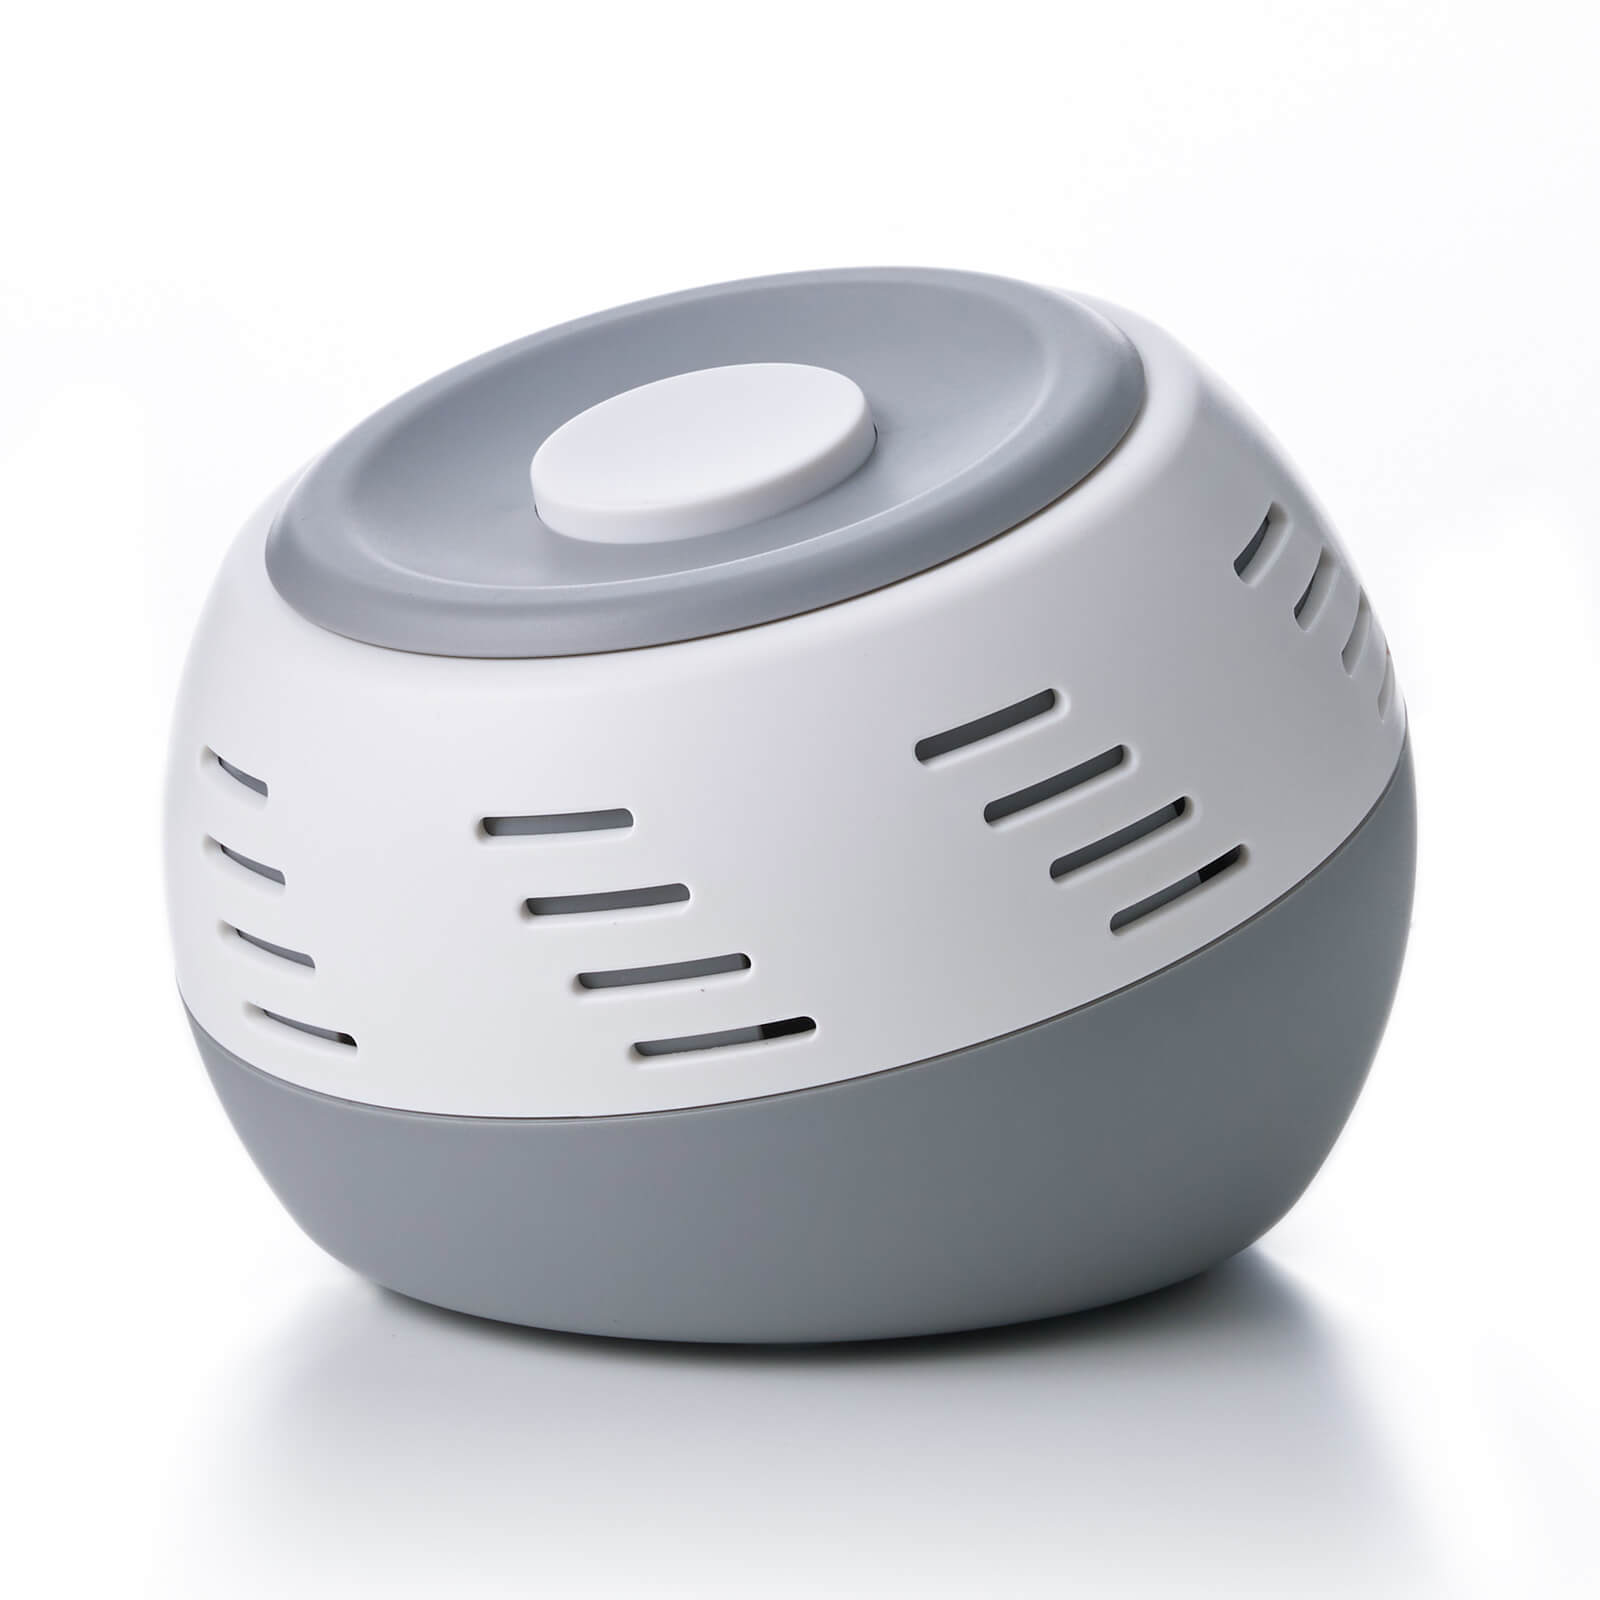 BABELIO White Noise Machine with Real Fan – Adjustable Tone, Memory Function, Easy Control, for Babies & Adults